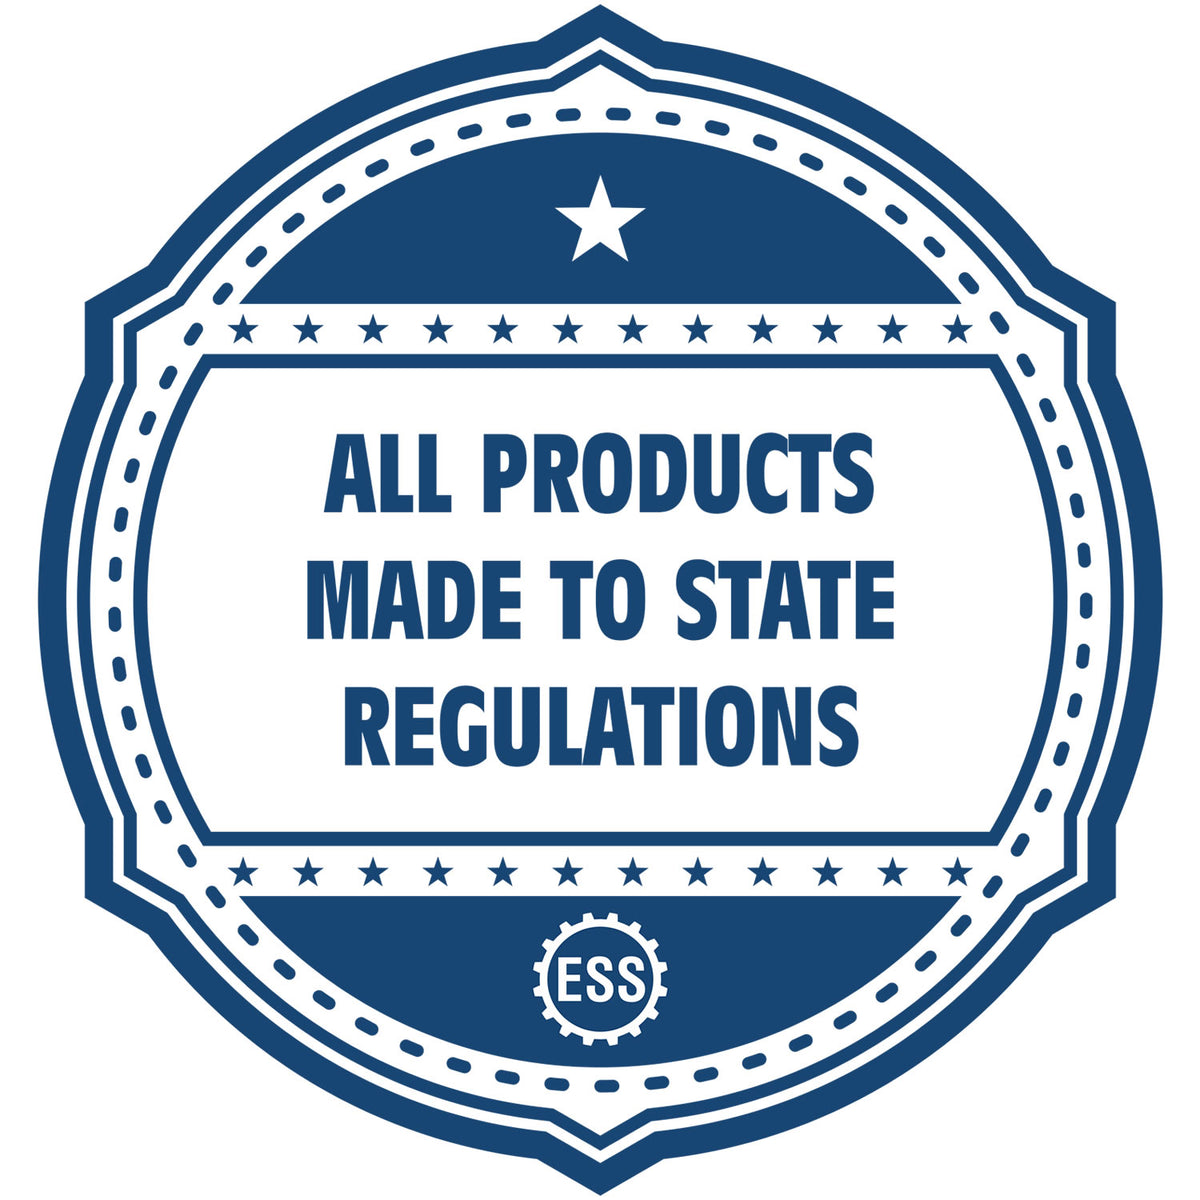 An icon or badge element for the Slim Pre-Inked Alaska Land Surveyor Seal Stamp showing that this product is made in compliance with state regulations.